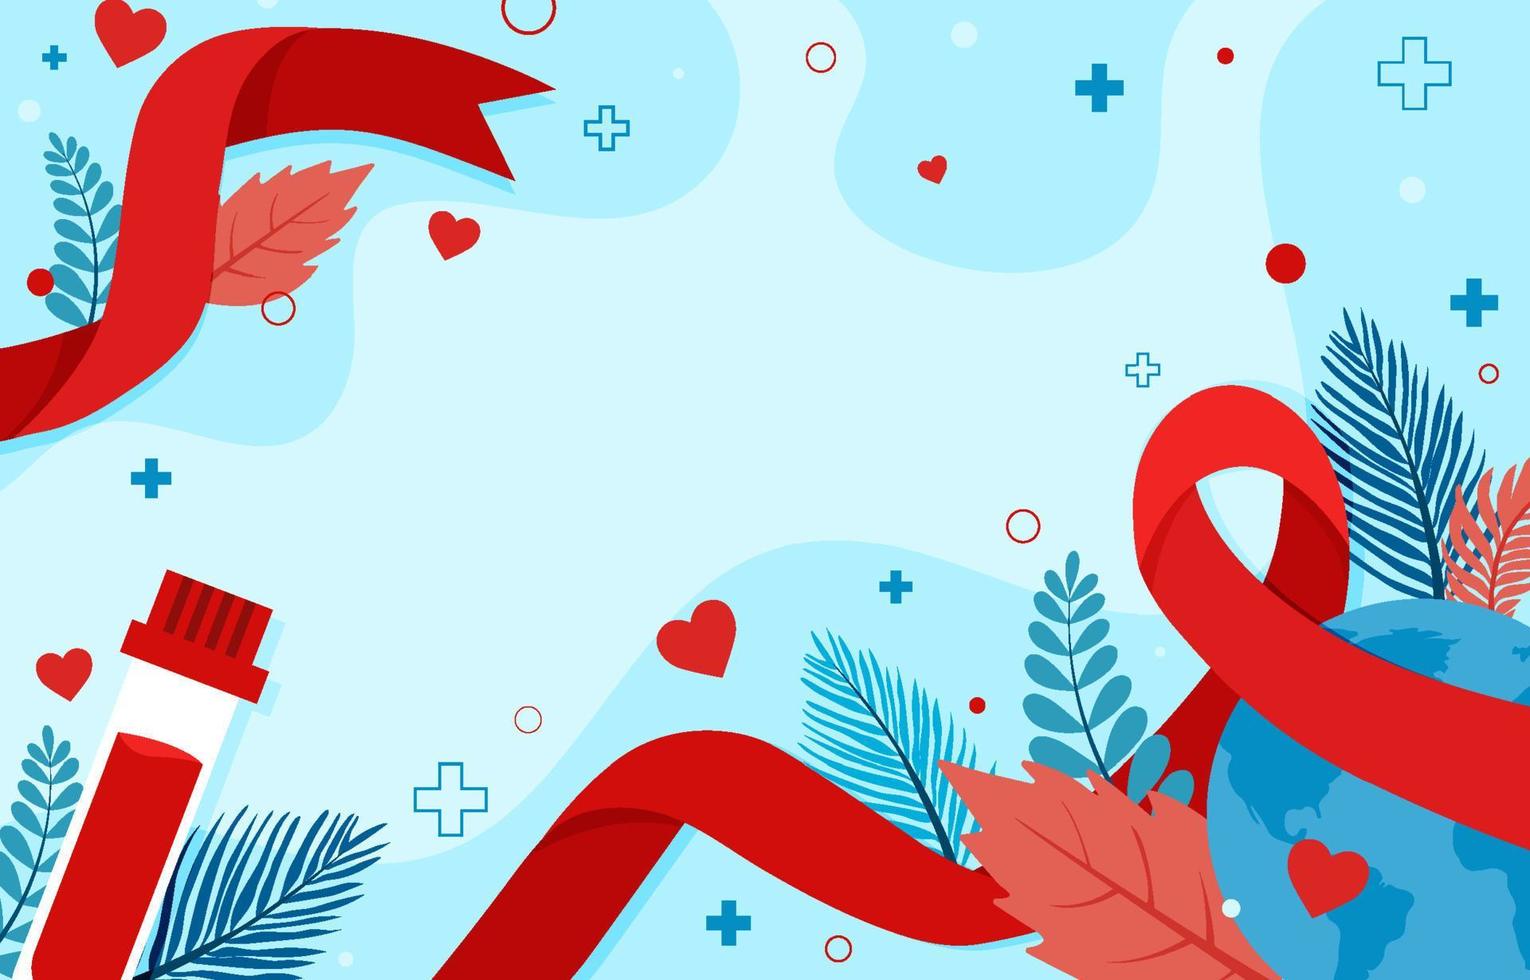 World Aids Day Background vector